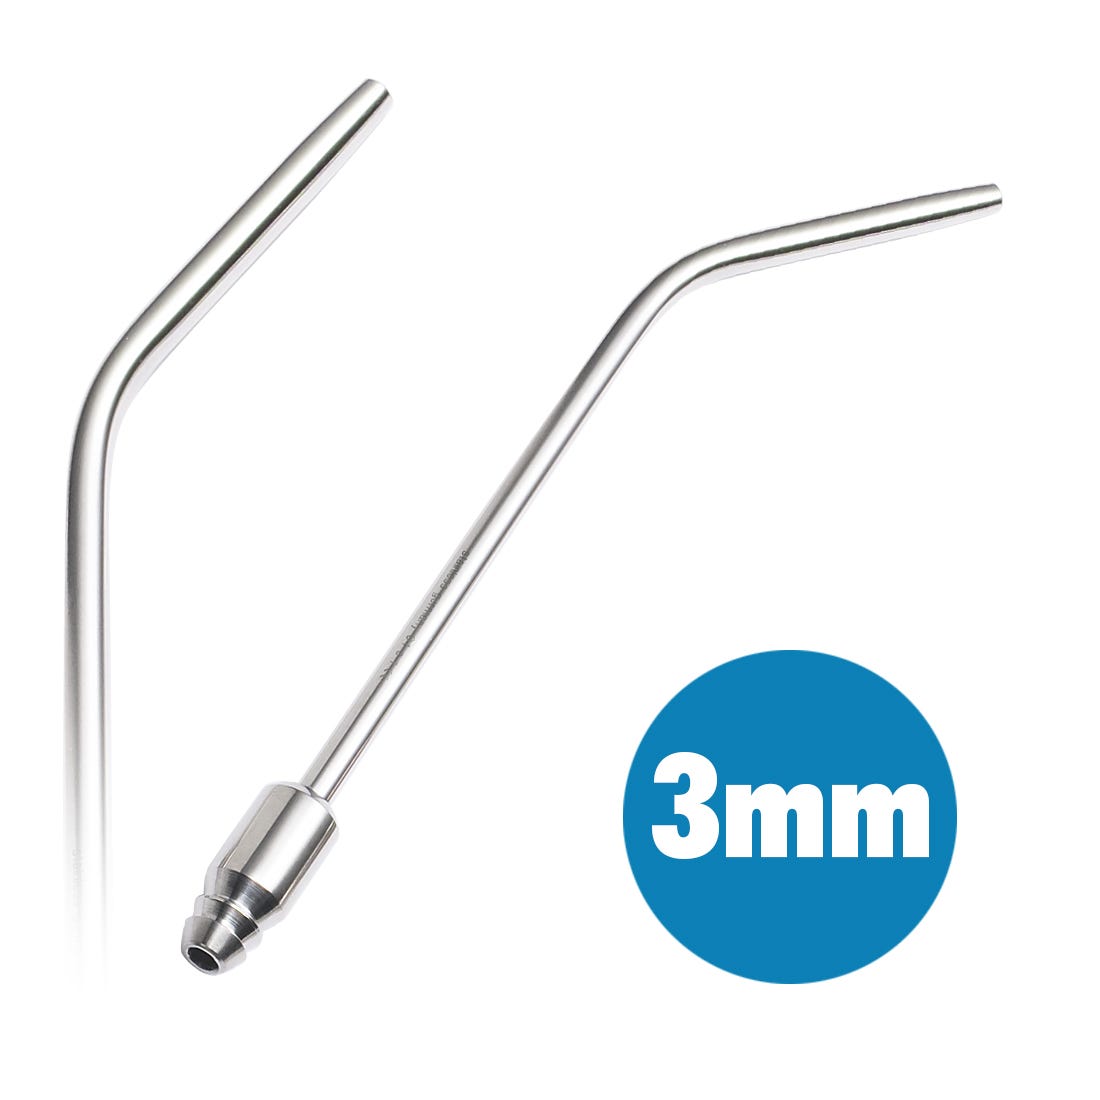 Suction Tip, 3mm opening, 6", 15cm